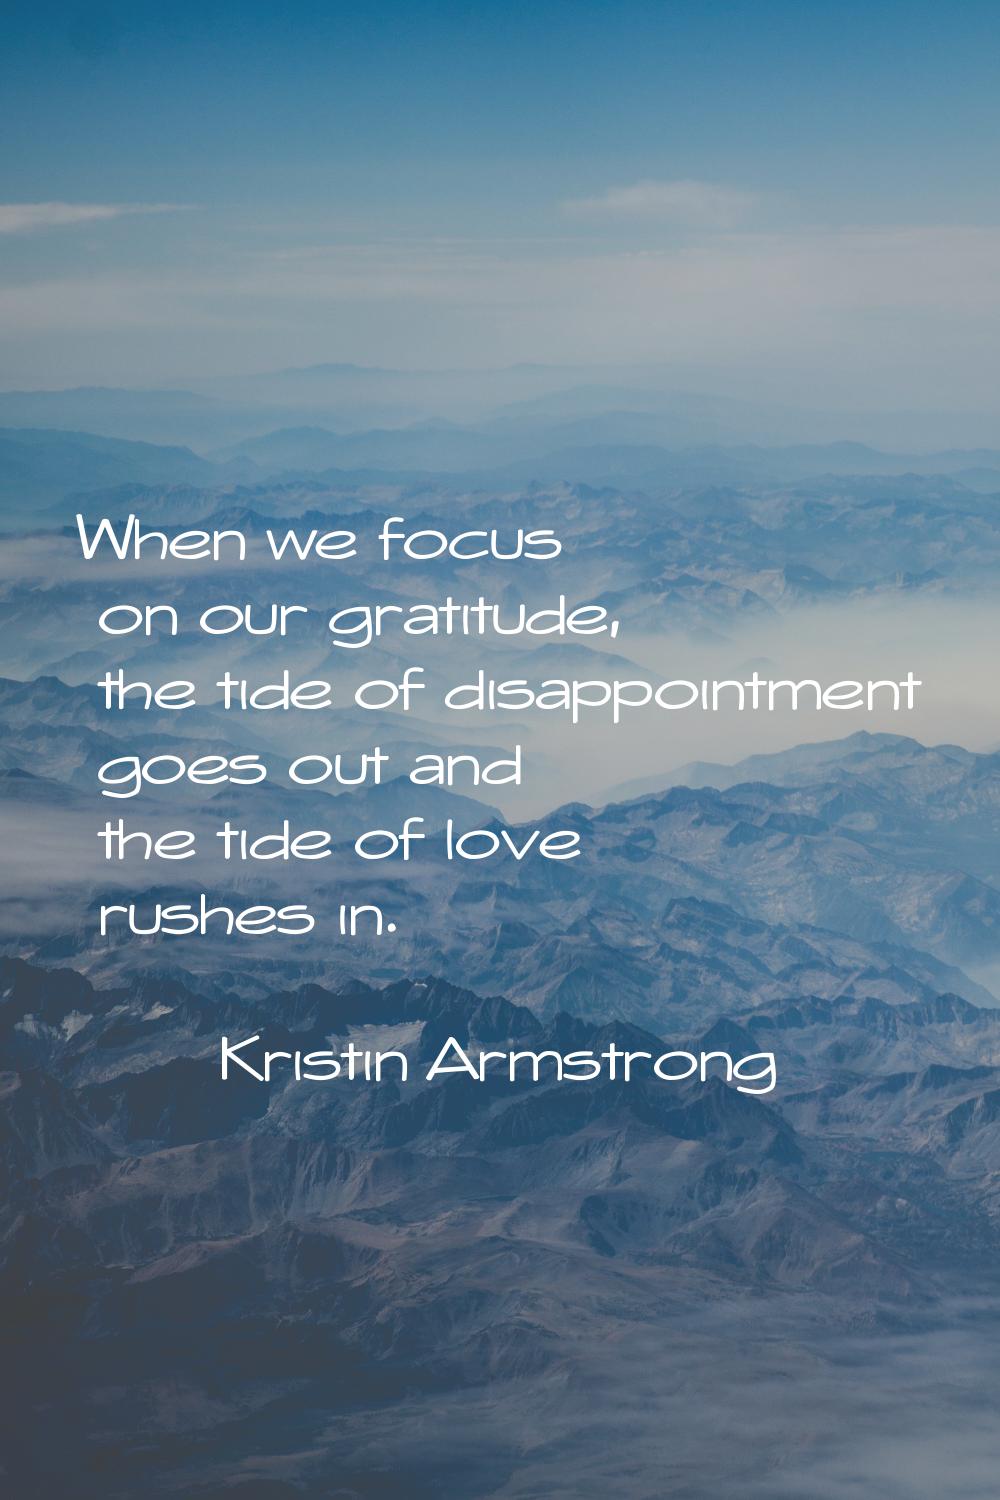 When we focus on our gratitude, the tide of disappointment goes out and the tide of love rushes in.